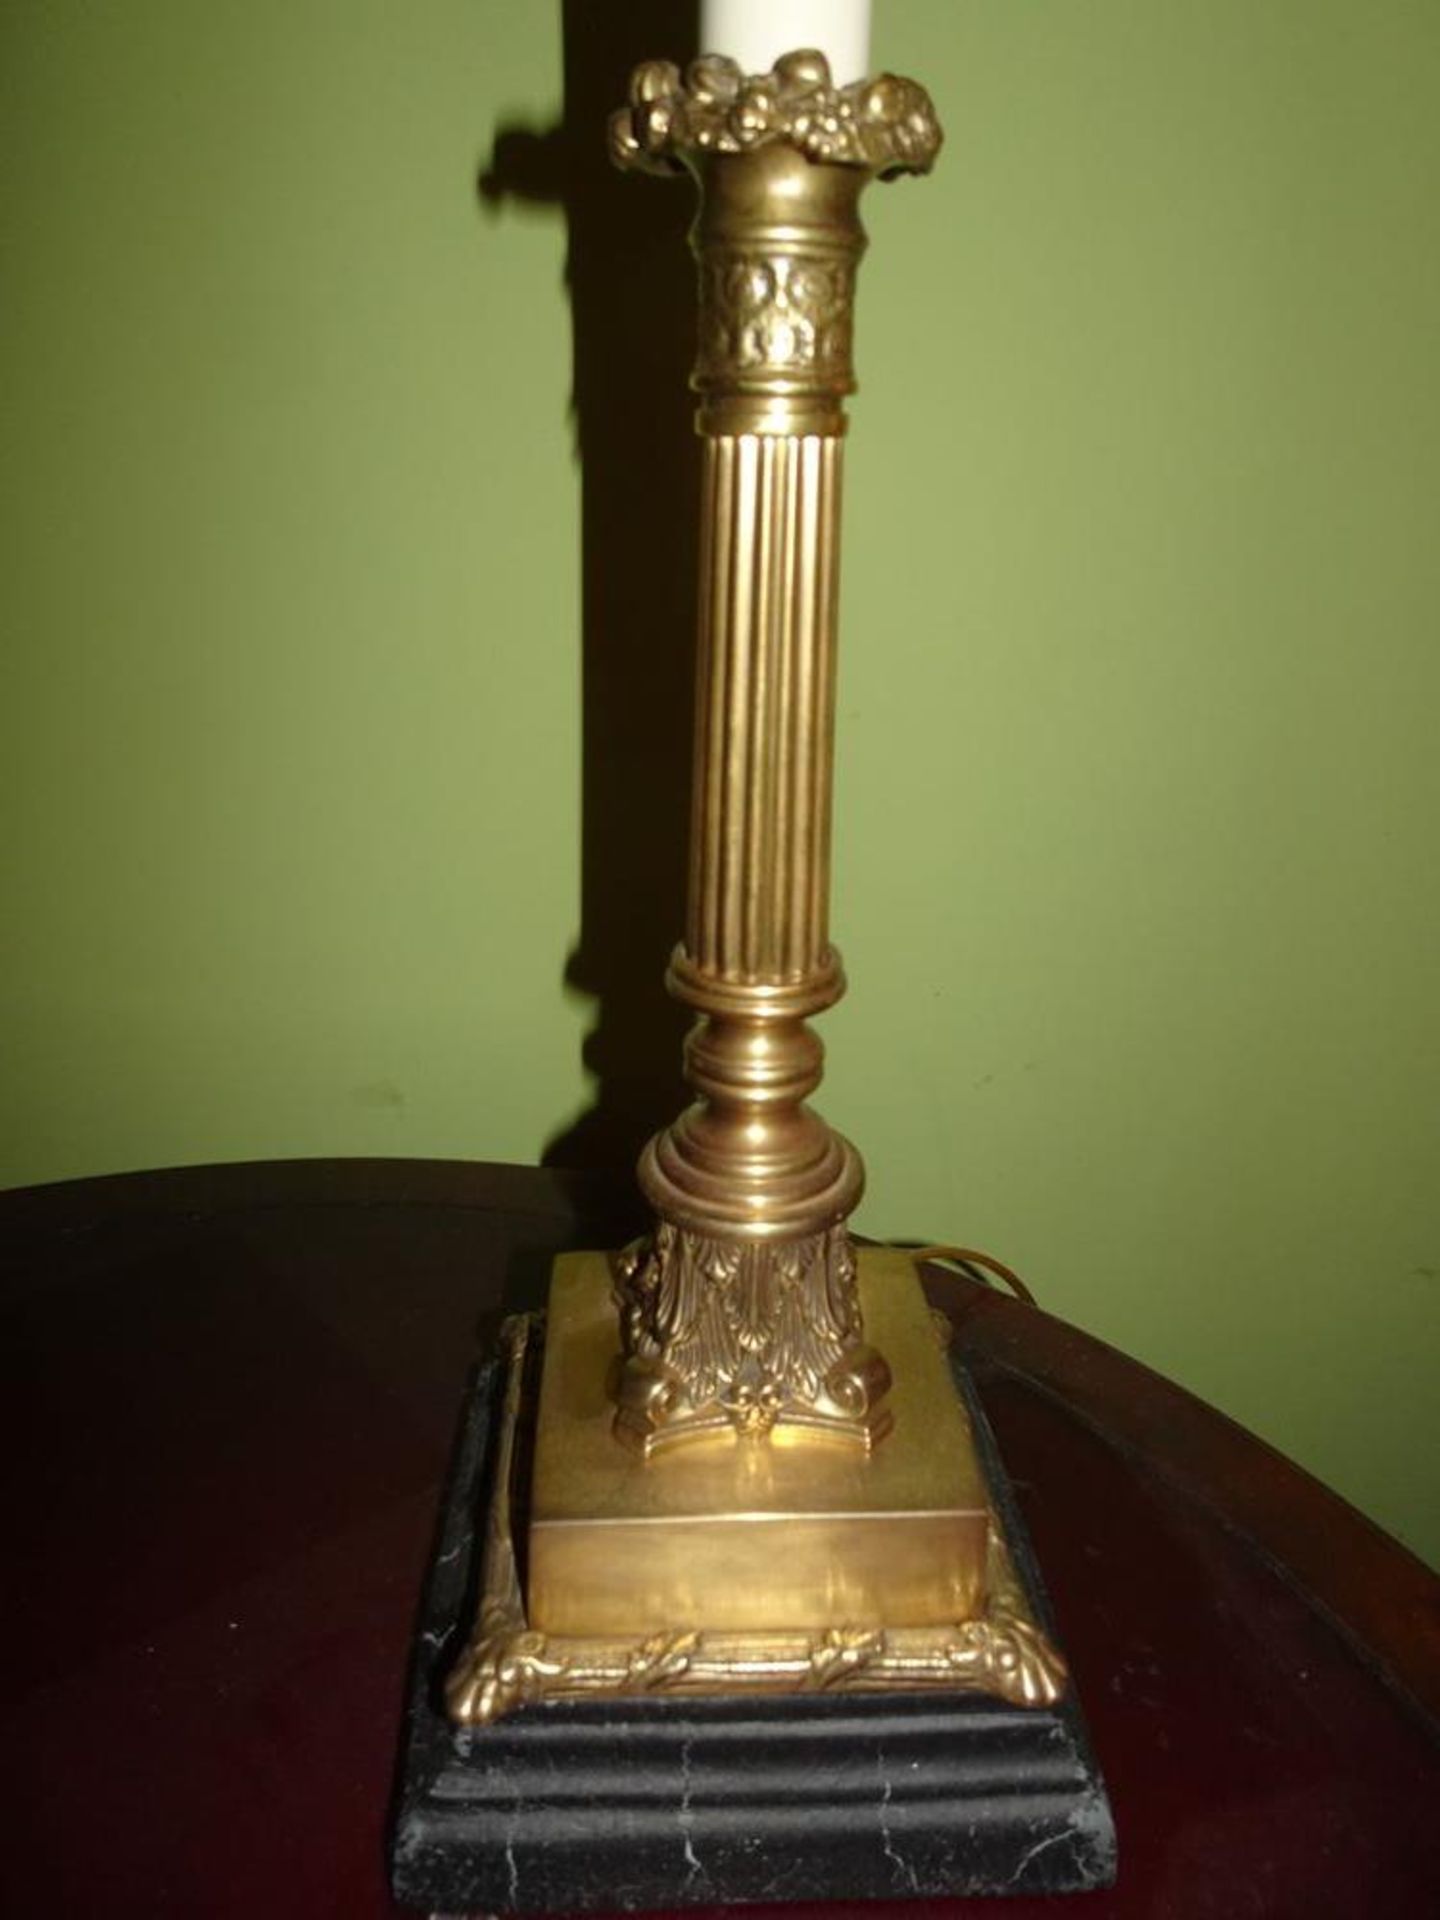 LOT (2) TABLE LAMP - ANTIQUE BRASS BASE, SILKEN SHADE (DAMAGE TO ONE SHADE) - Image 3 of 10